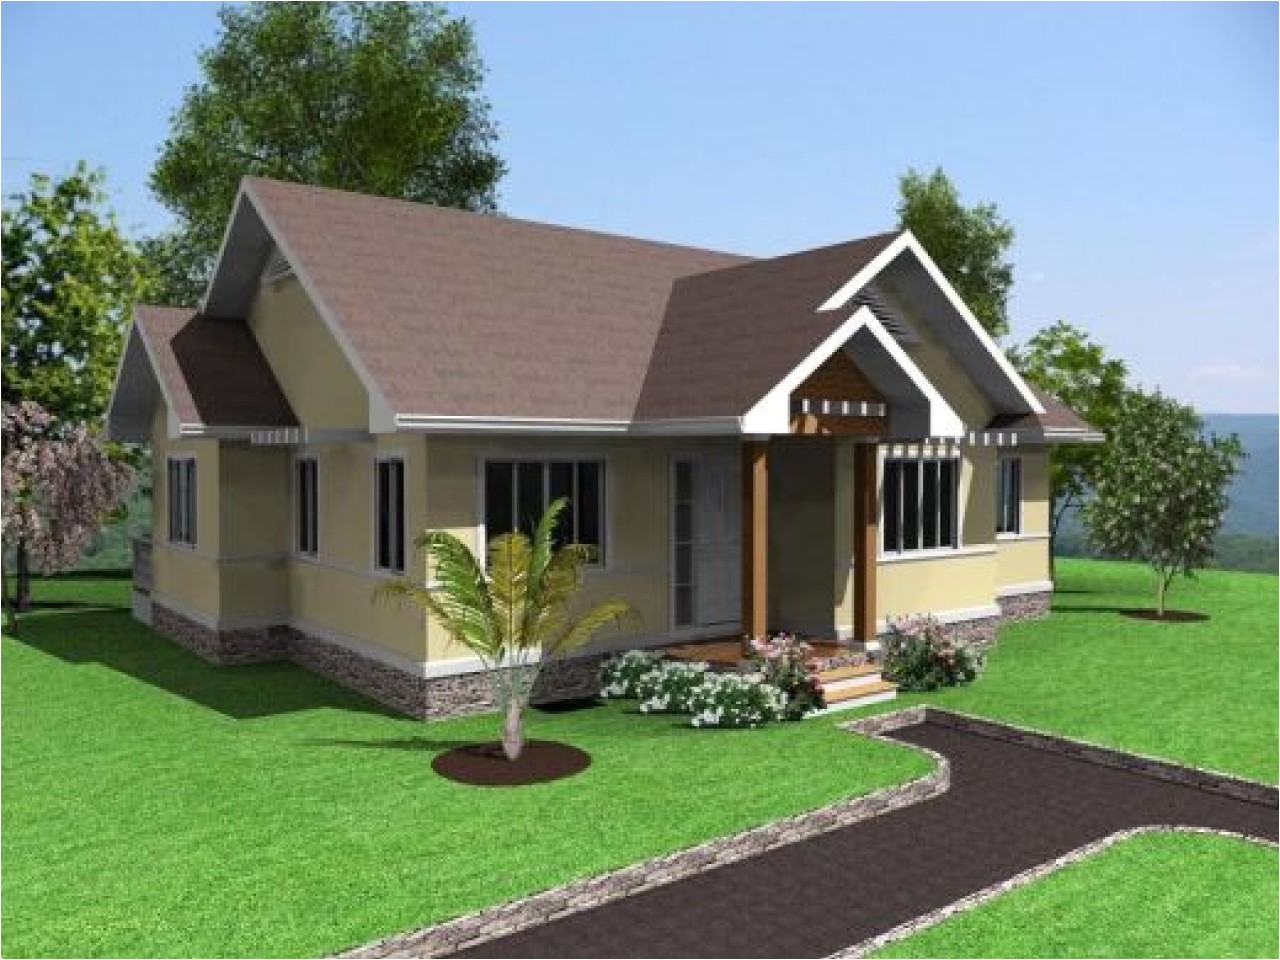 feba325f9631fd46 simple house design 3 bedrooms in the philippines simple modern house designs